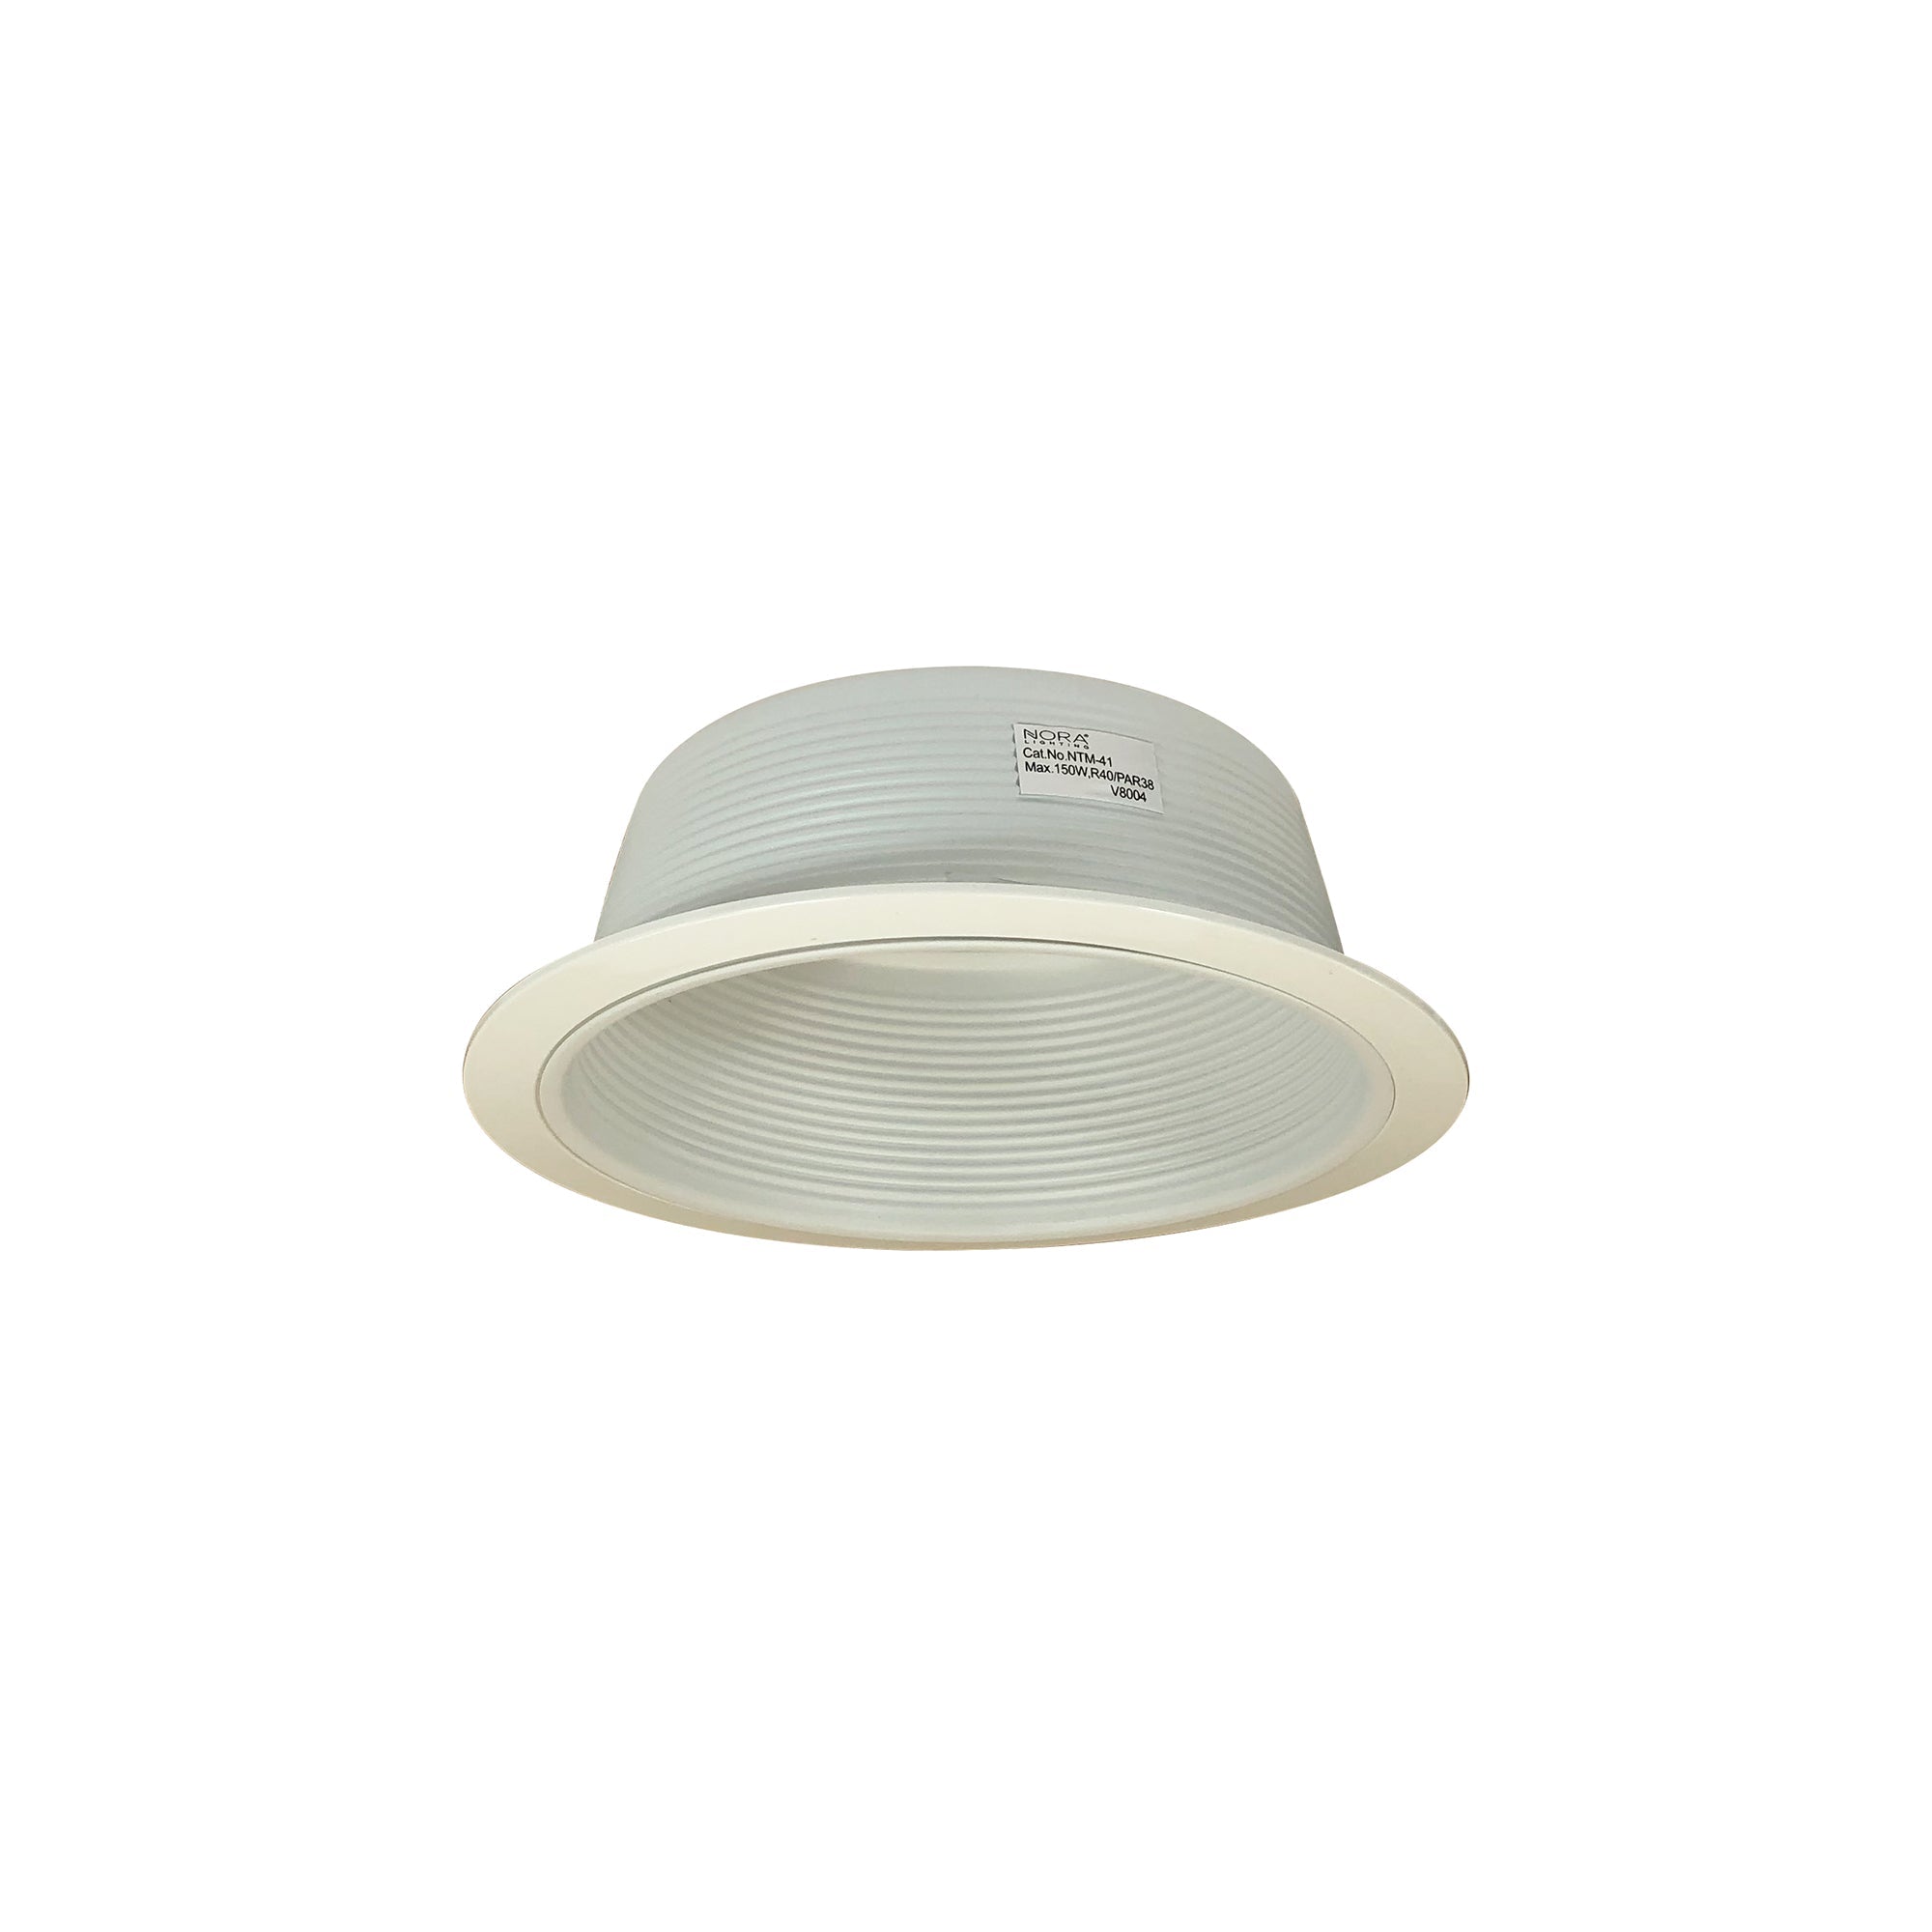 Nora Lighting NTM-41 - Recessed - 6 Inch Stepped Baffle w/ Plastic Ring, White